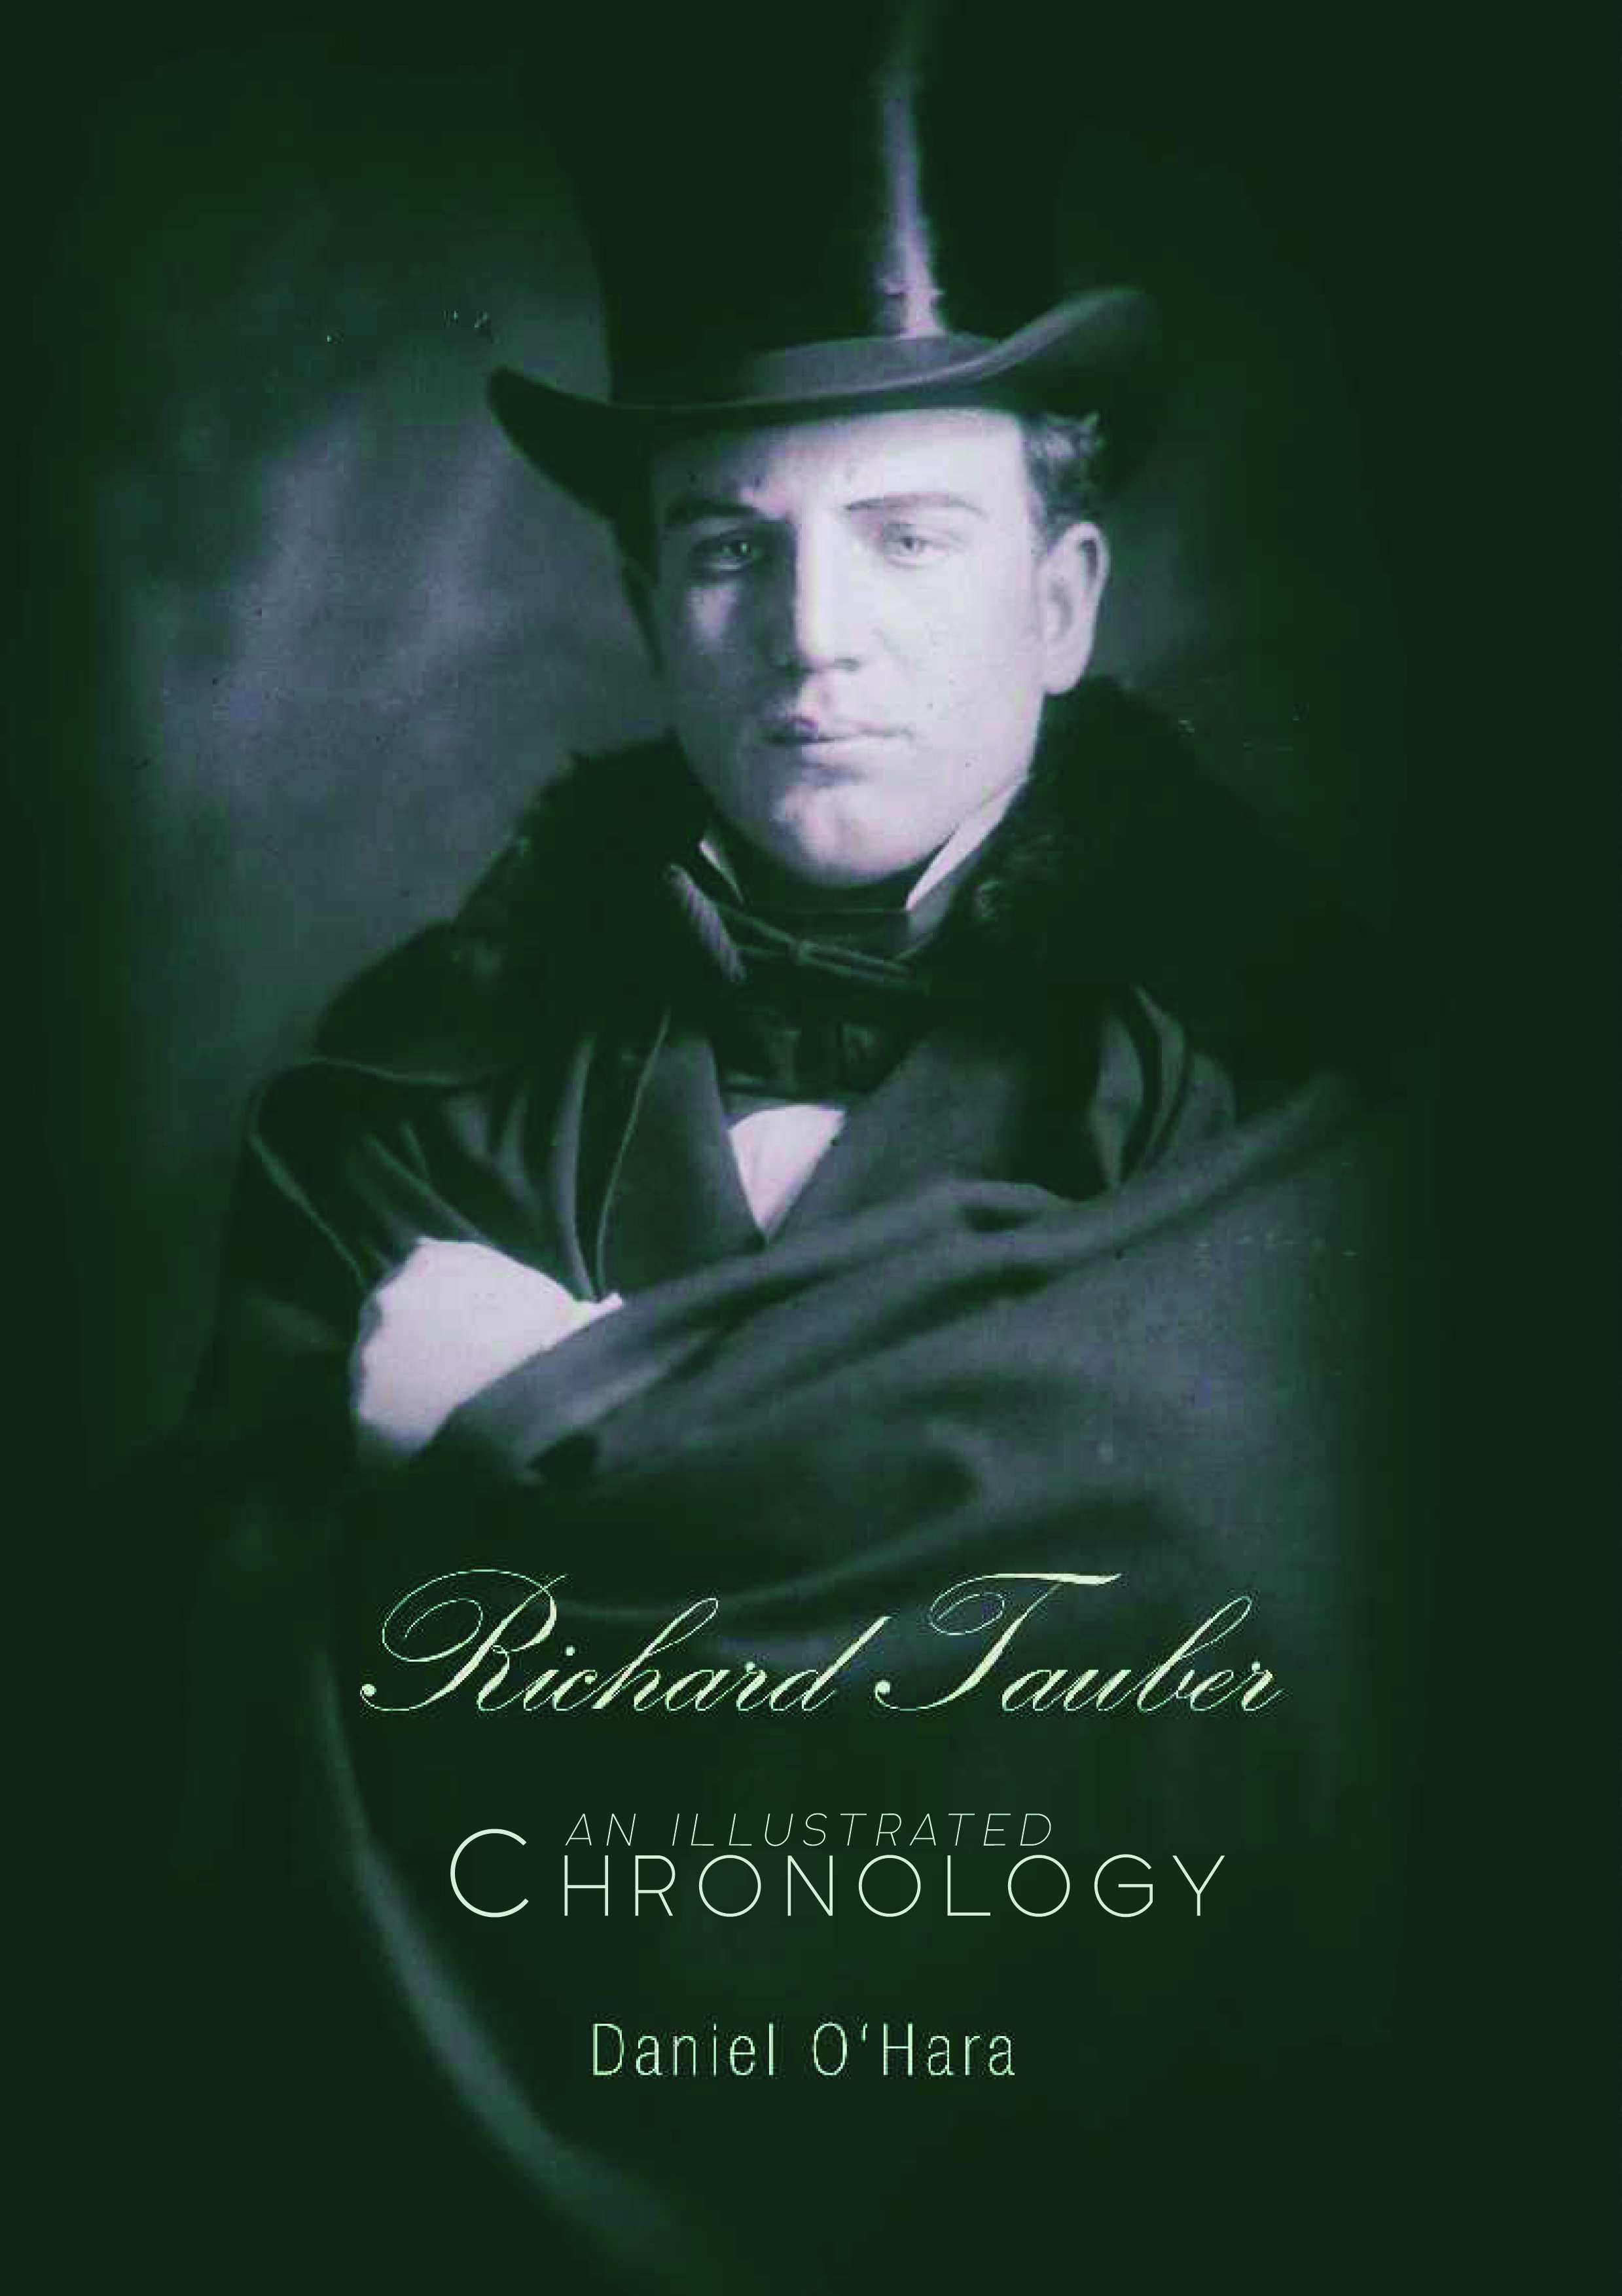 Click to Download the Richard Tauber Chronology